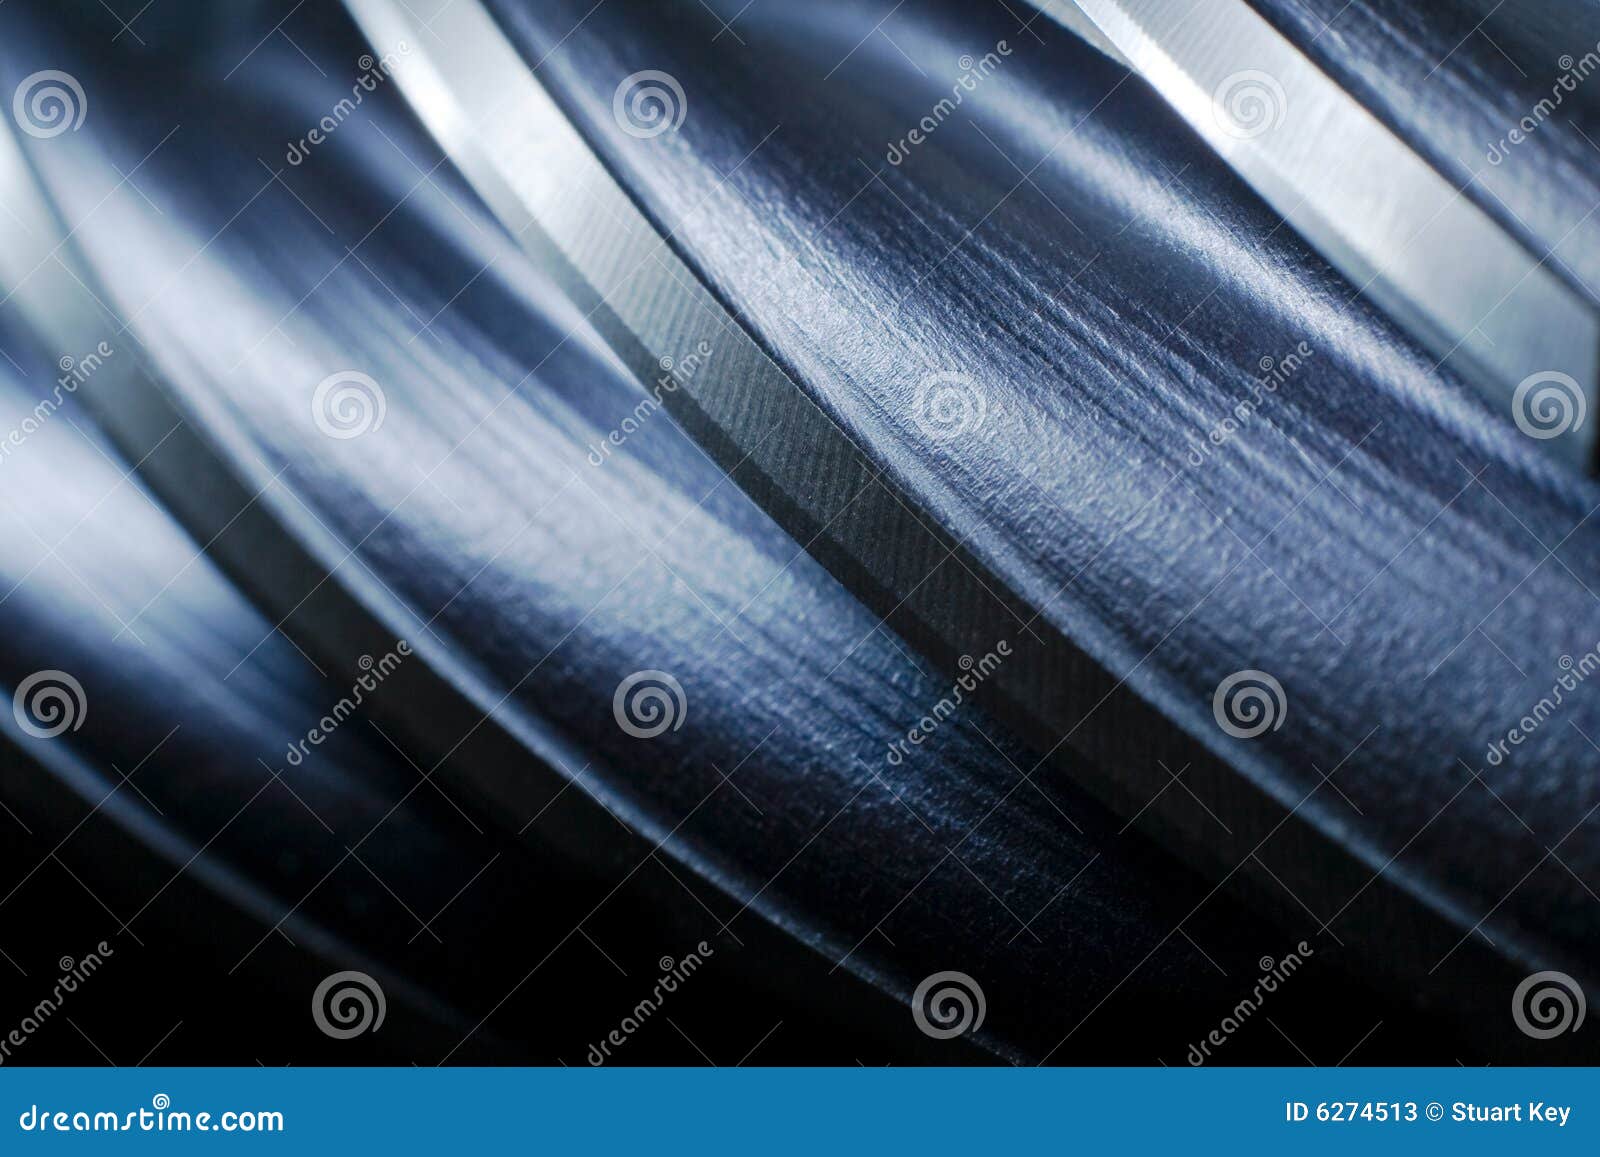 drill bit blades abstract